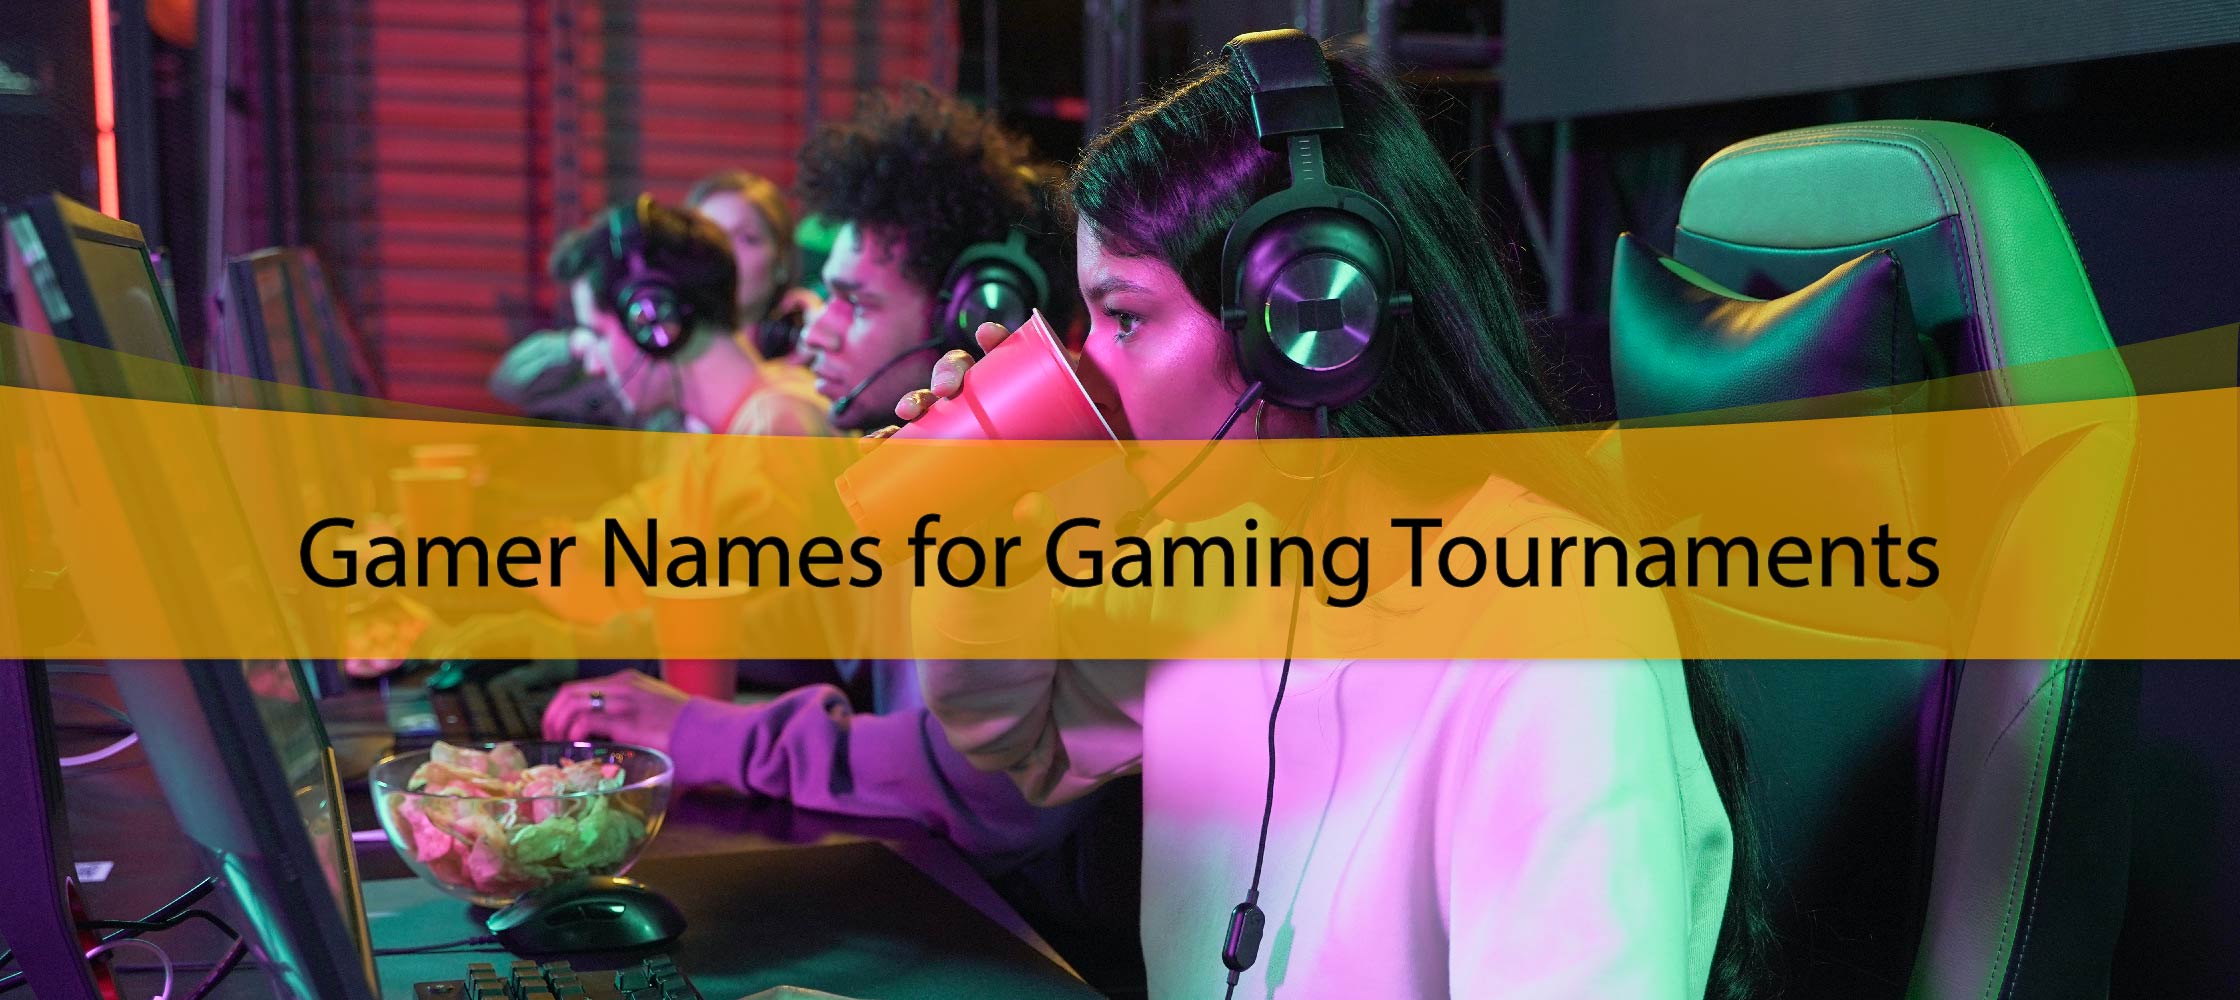 Gamer Names for Gaming Tournaments